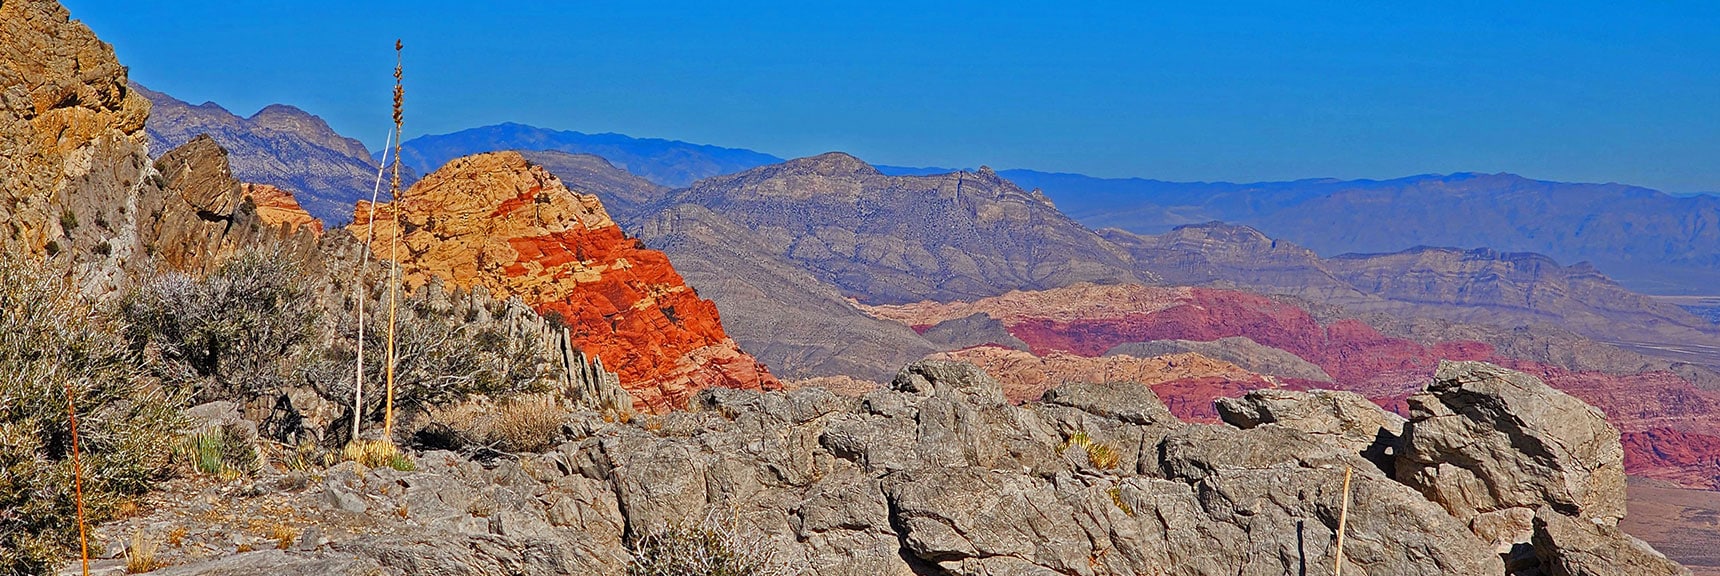 Damsel Peak (Center) Across Red Rock Canyon and Calico Basin and Brownstone Basin. | Rainbow Mountains Mid Upper Crest Ridgeline from Lovell Canyon, Nevada